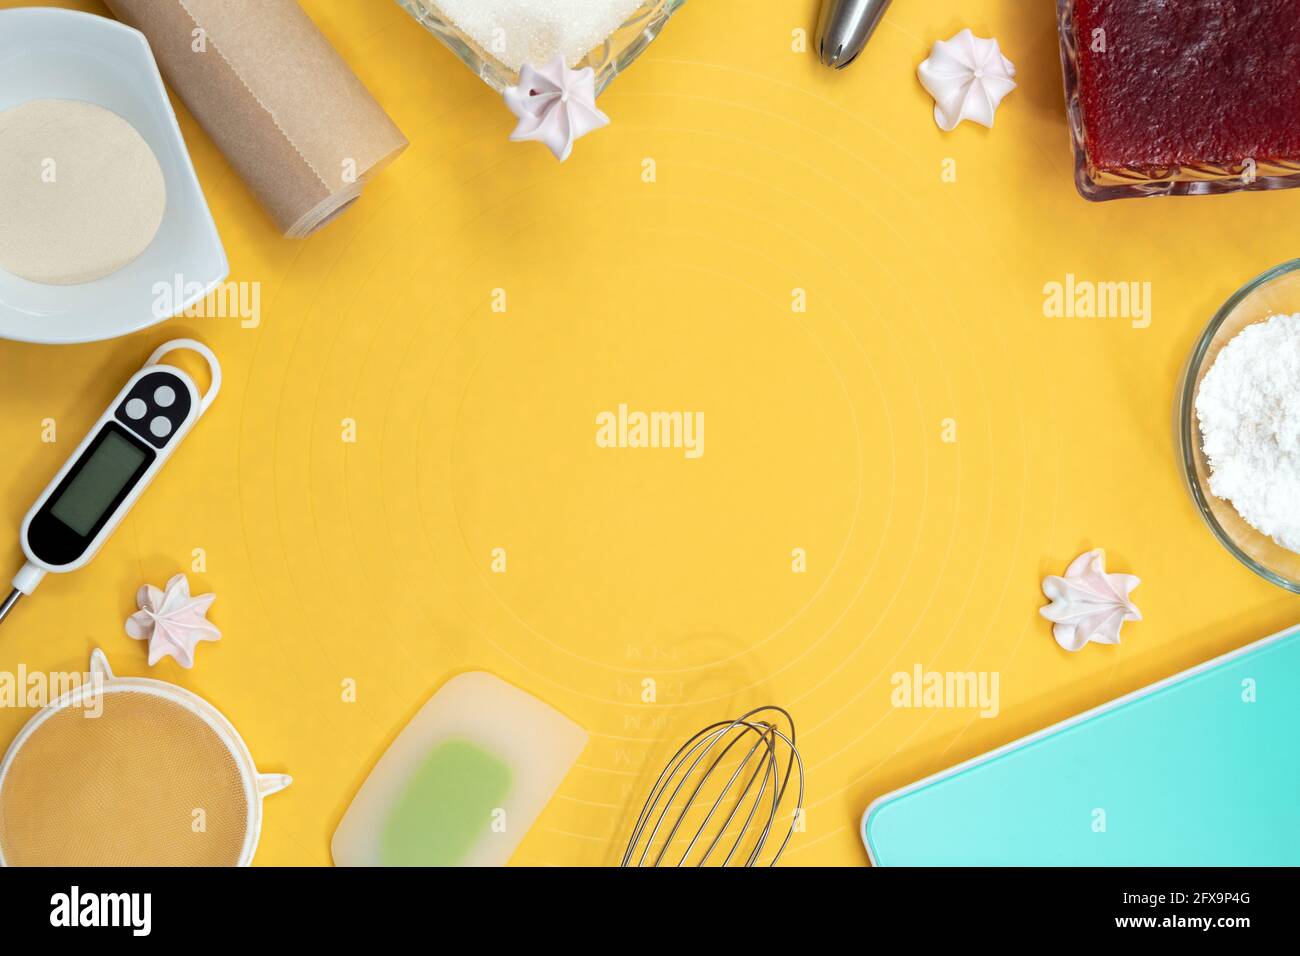 Tools and ingredients for making meringue: thermometer, whisk, spatula, parchment, sugar, jam, metal nozzle. Top view. Yellow background with space Stock Photo